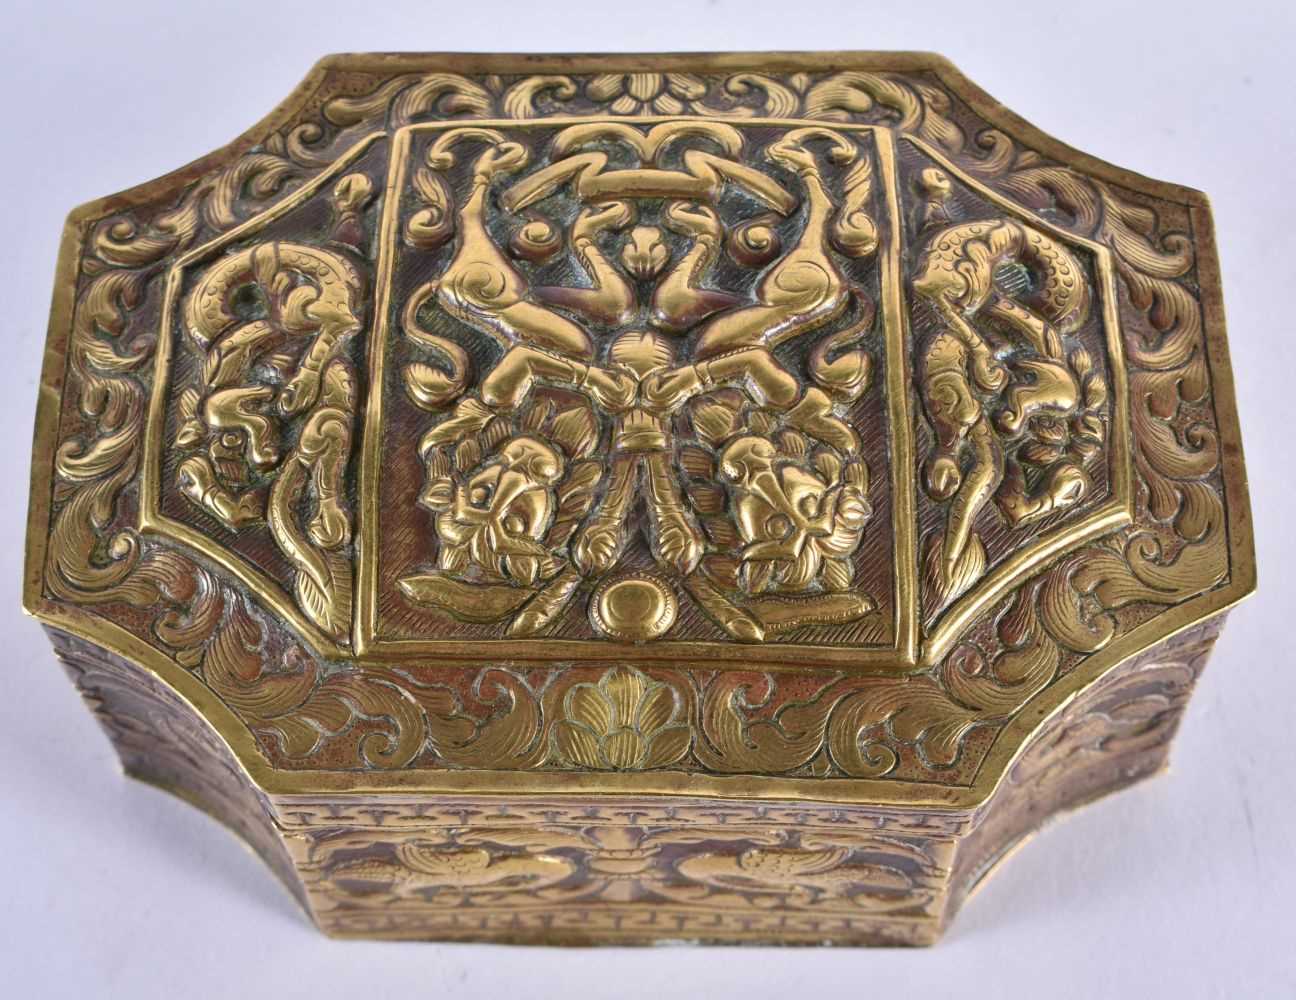 AN 18TH/19TH CENTURY TIBETAN INDIAN REPOUSSE CANTED BOX AND COVER decorated with birds, foliage - Image 3 of 4